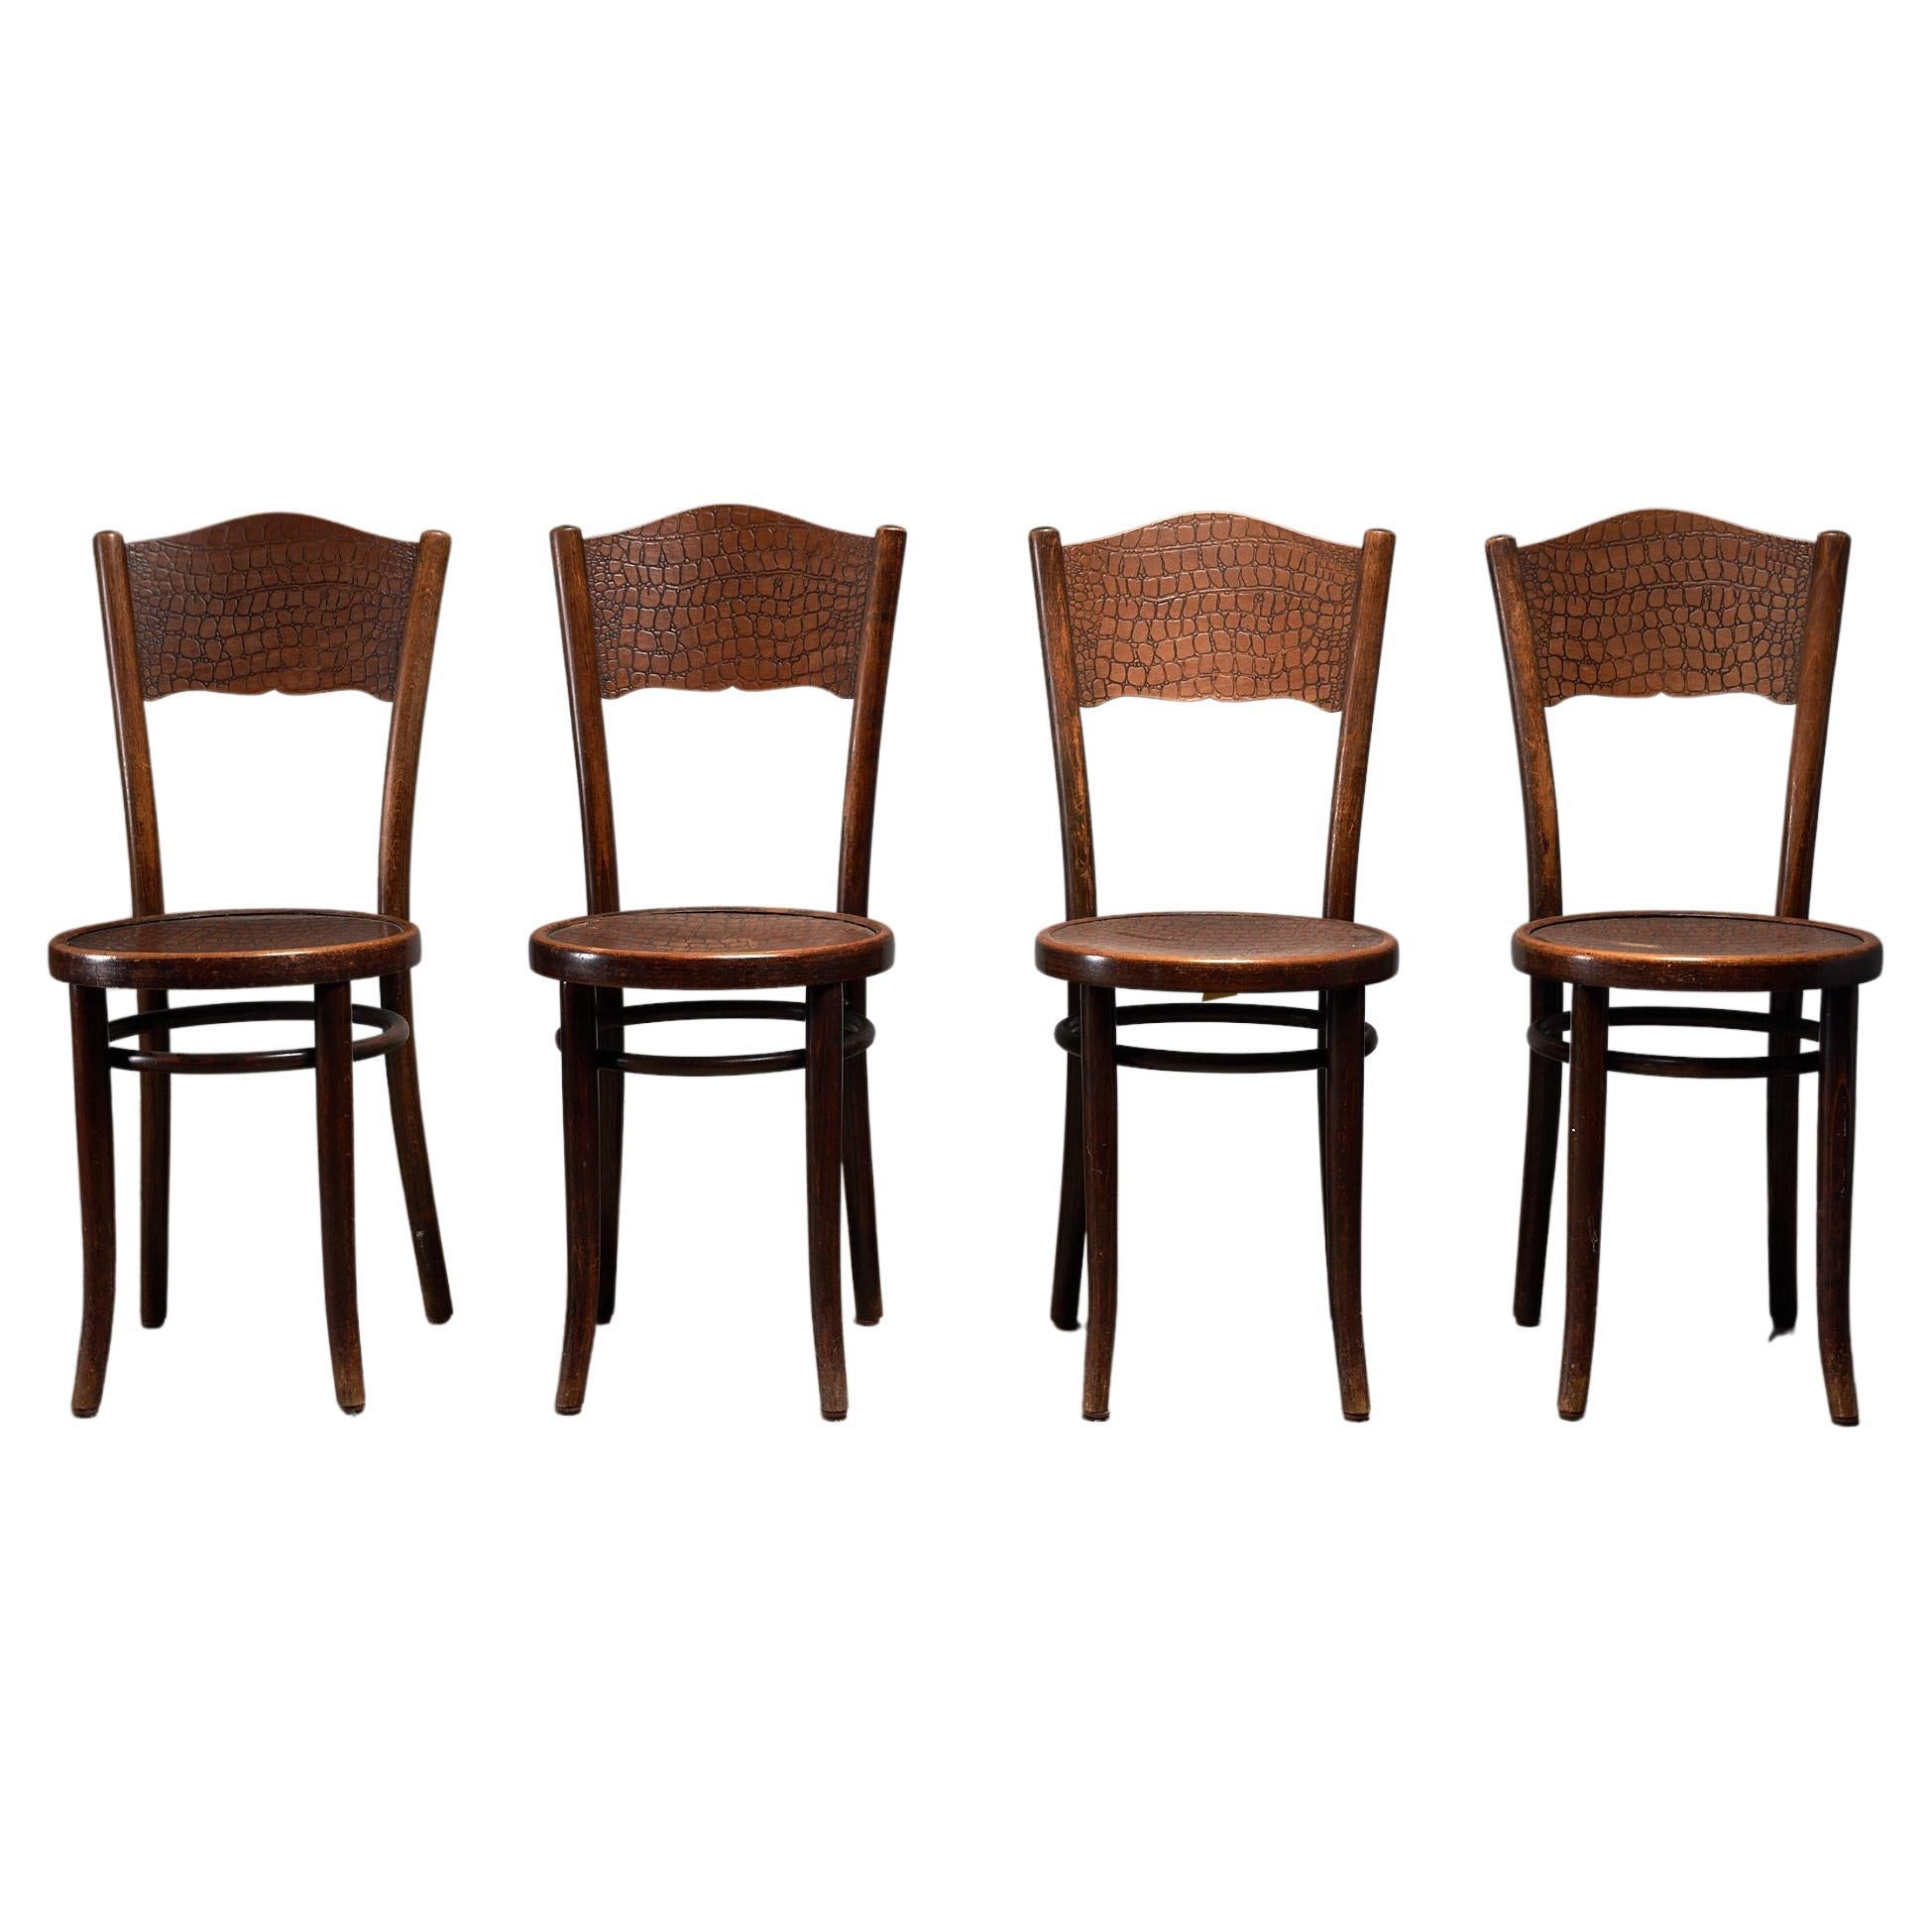 Set of 4 vintage bentwood bistro chairs with Crocodile pattern by Thonet For Sale